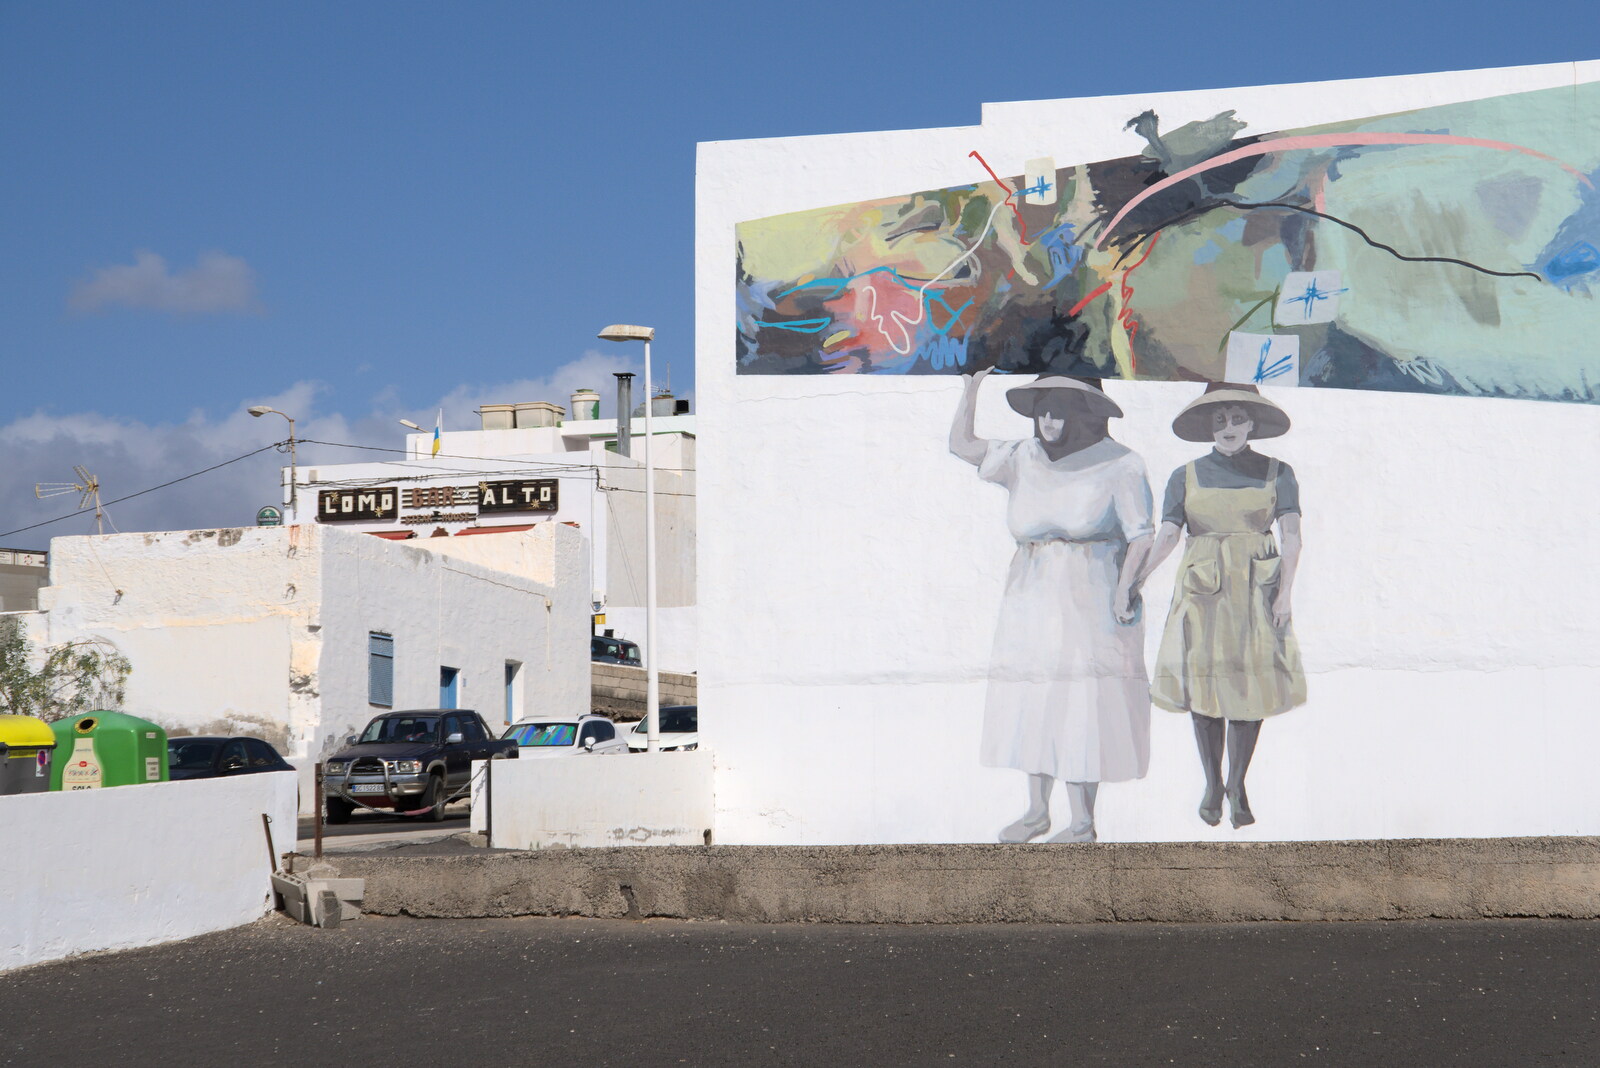 Wall art near Lomo Alto from Five Days in Lanzarote, Canary Islands, Spain - 24th October 2021